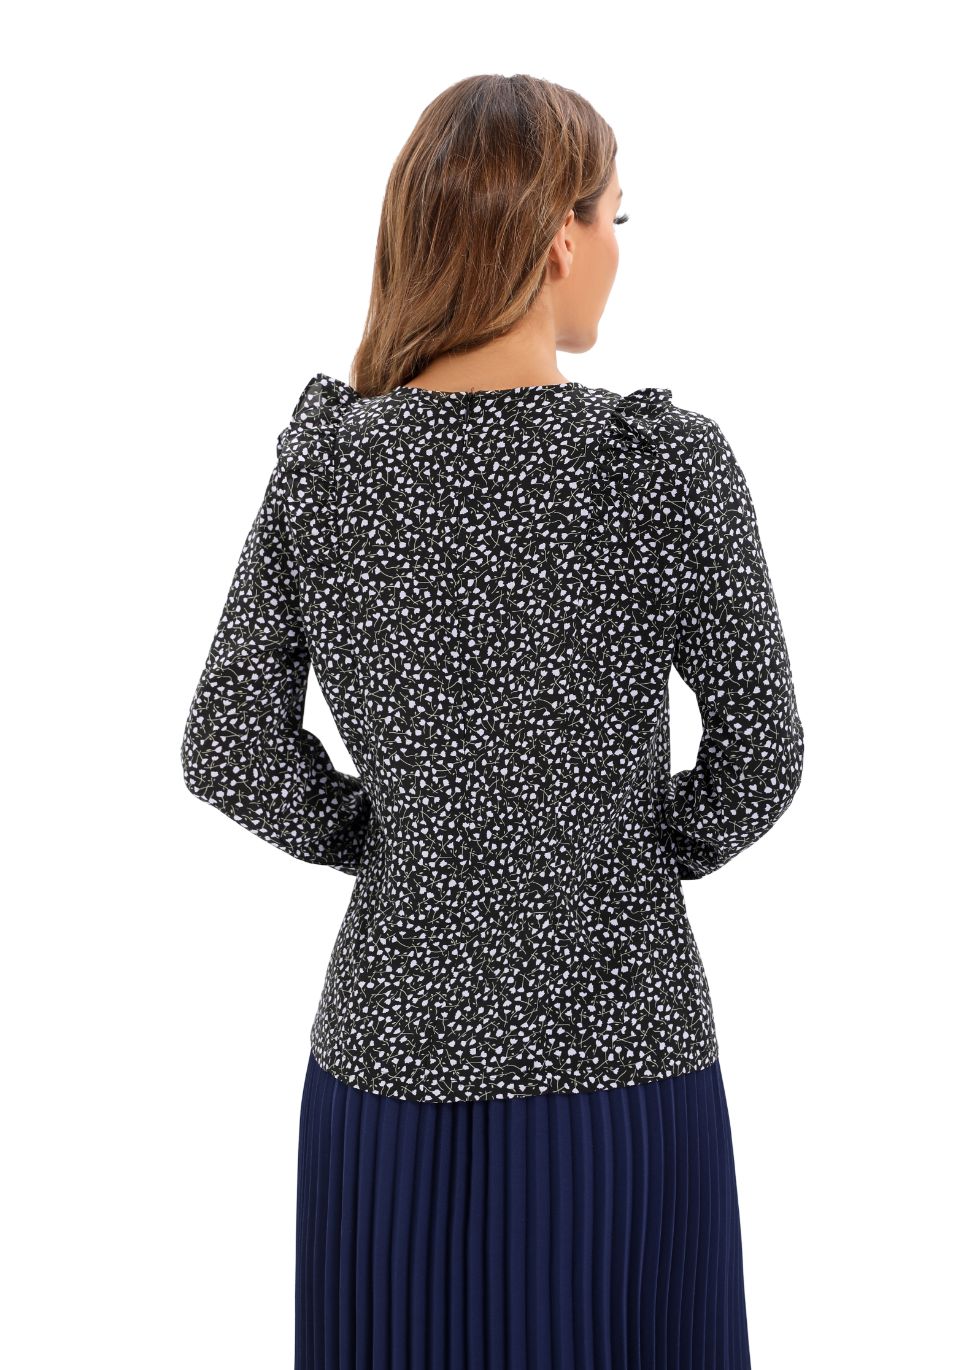 Micro Print Blouse with Long Sleeves and Bib Front - alamaud